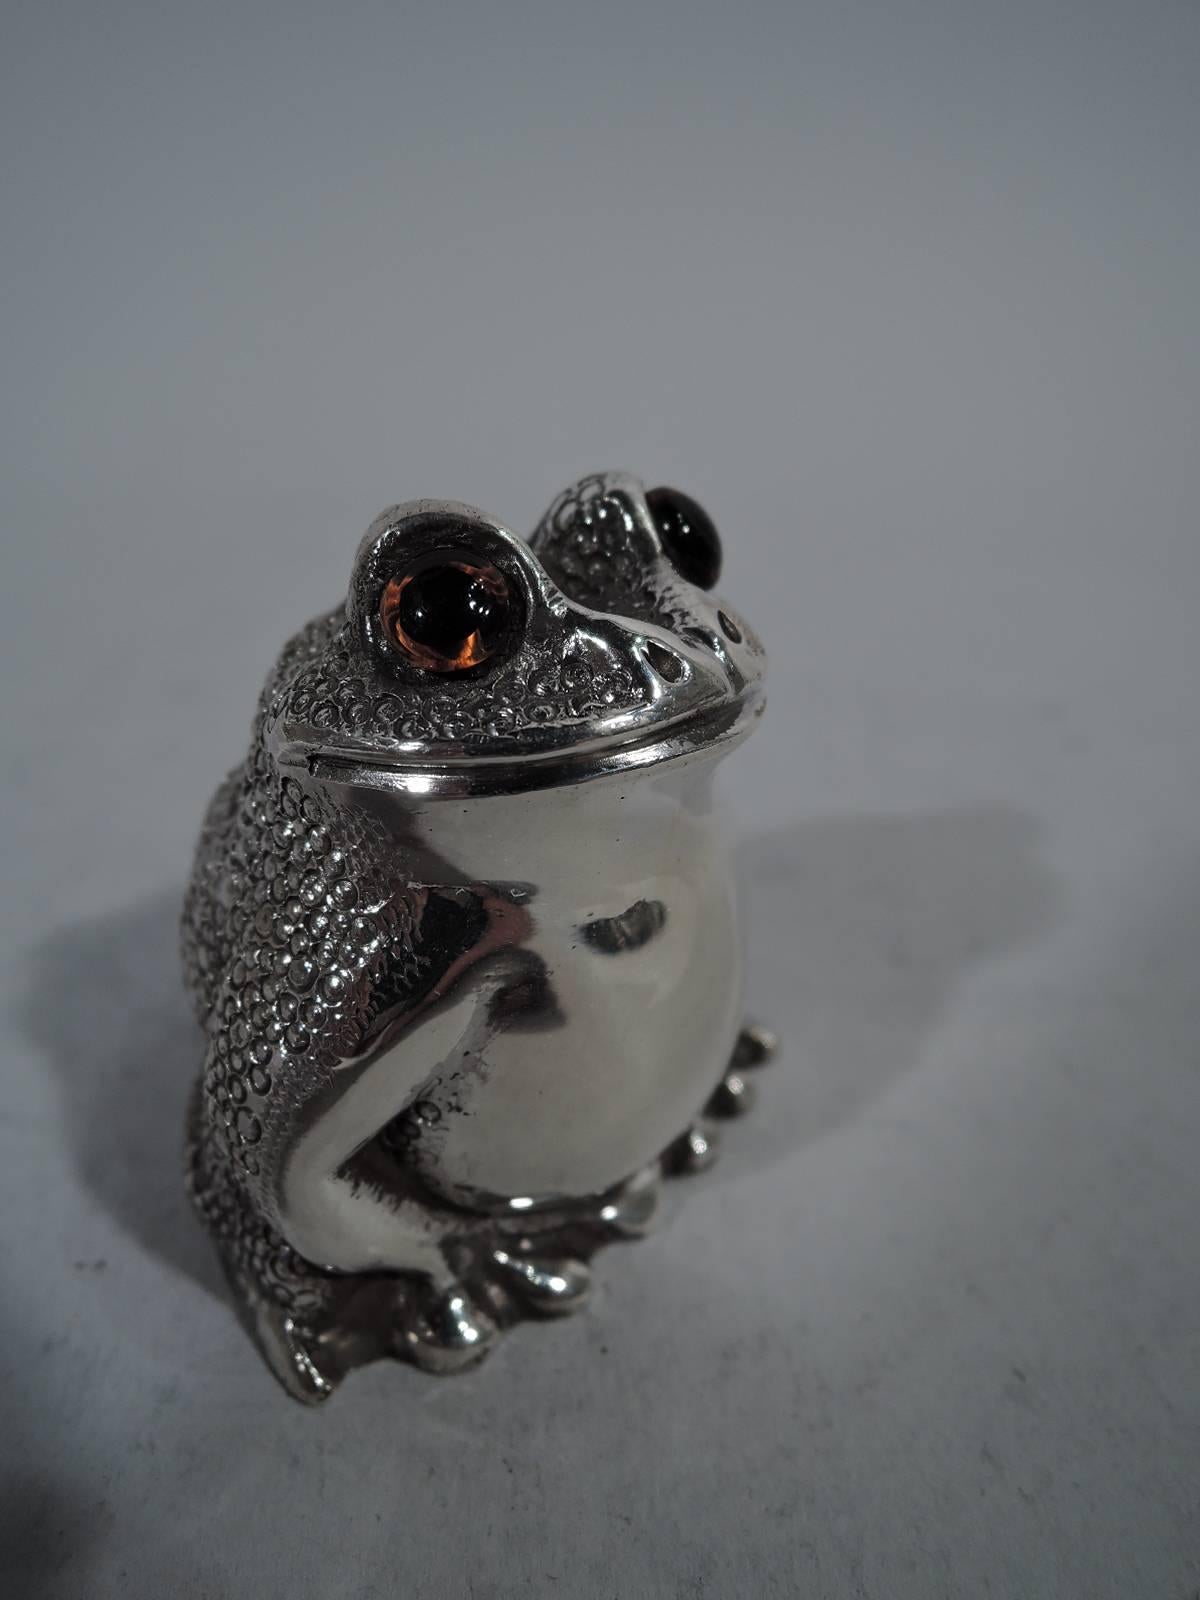 Pair of English sterling silver figural salt and pepper shakers. Each: A squatting reptile with legs gathered close to body. Scaly back, smooth front, and intense glass exophthalmic eyes. Closed mouth set in smirking smile. Plastic plug. London